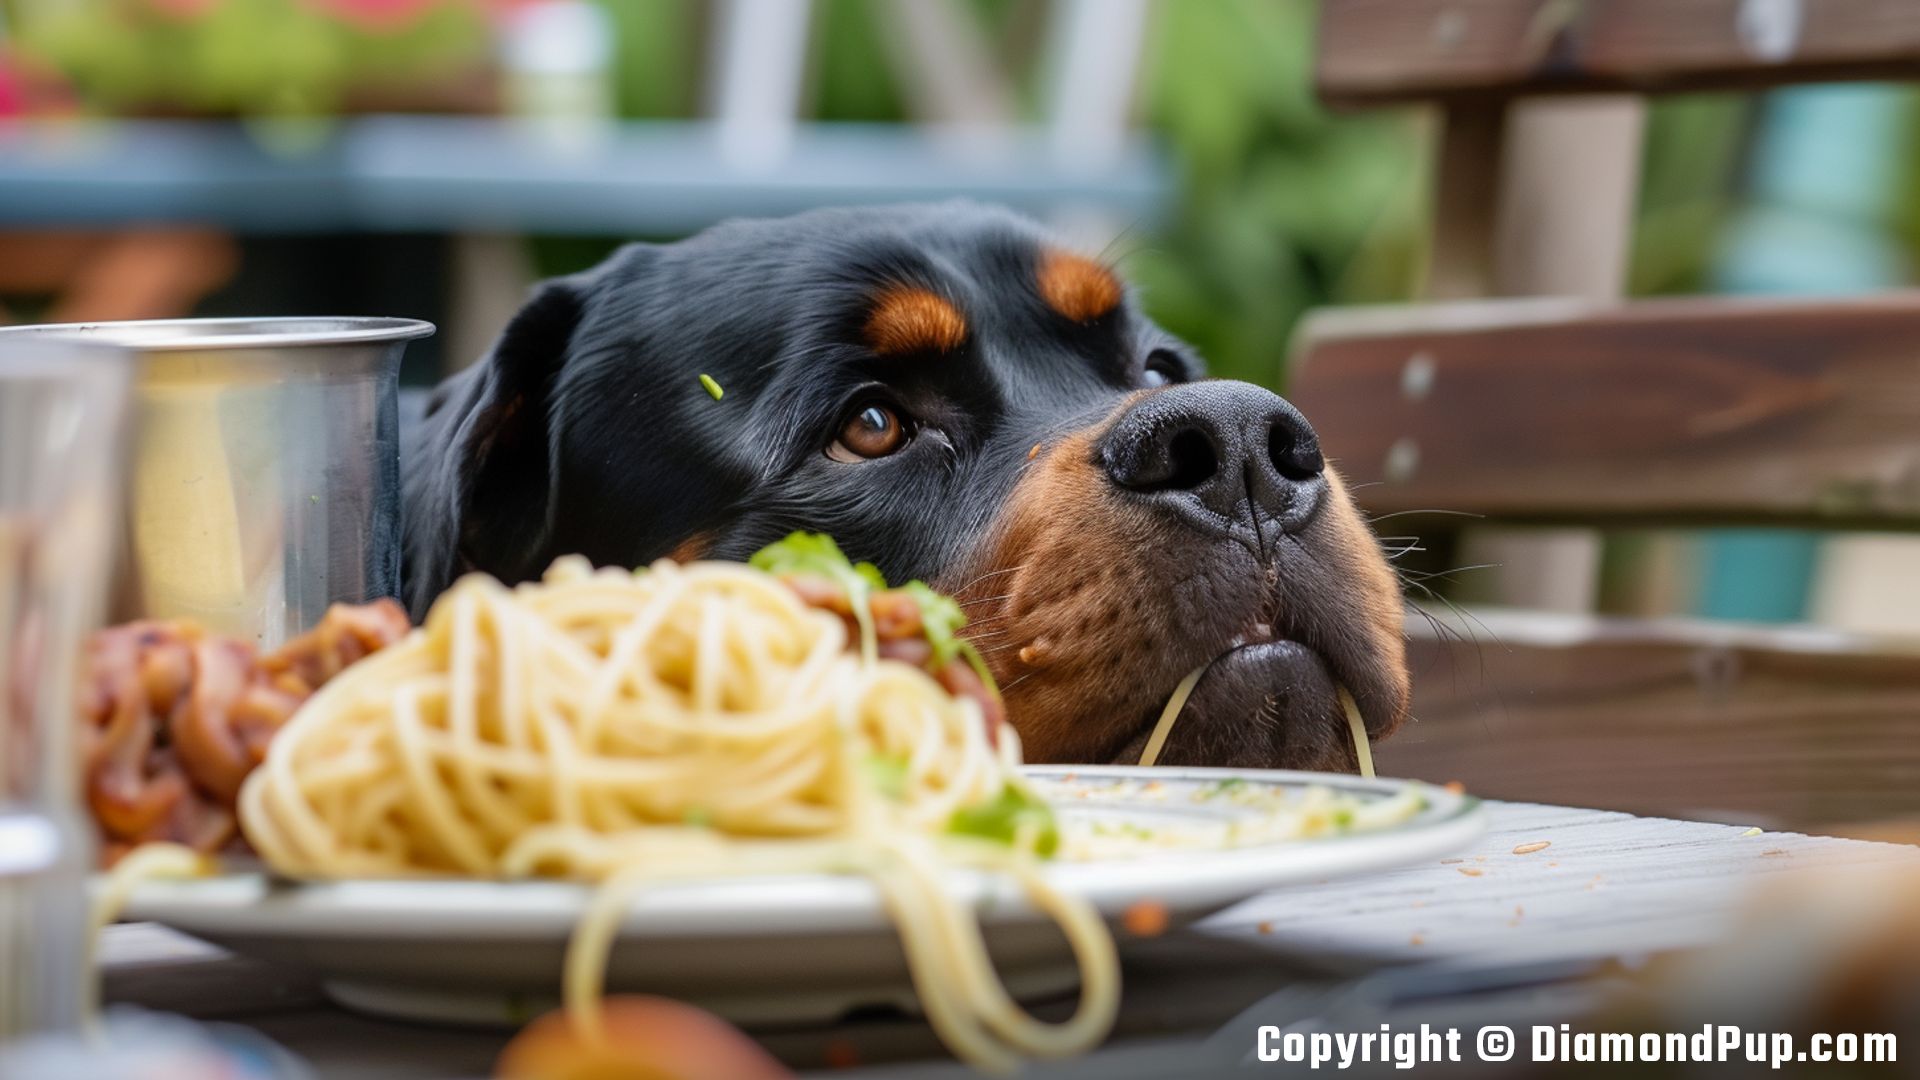 Photograph of an Adorable Rottweiler Snacking on Pasta